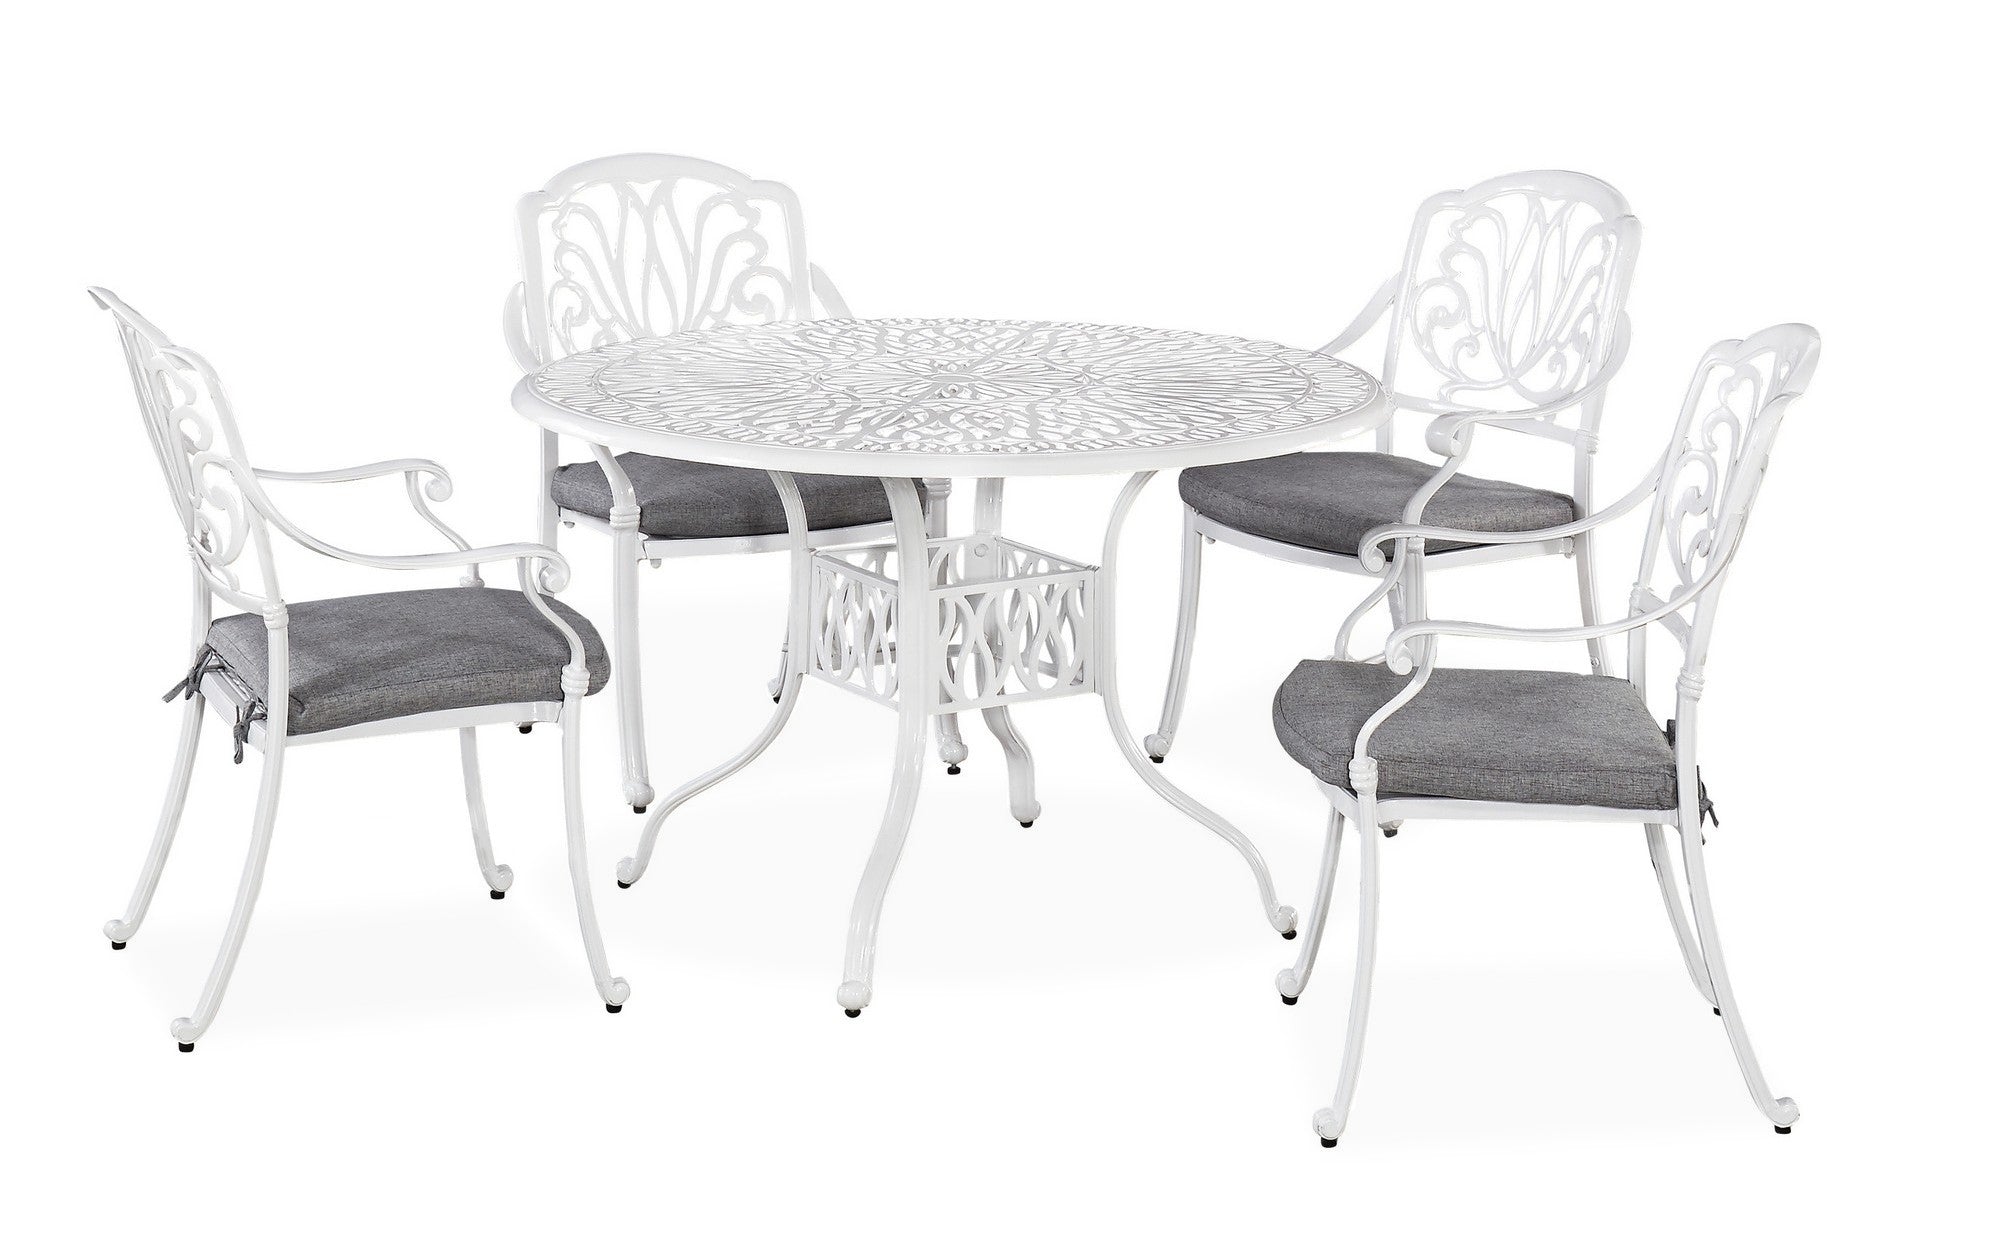 Capri 5 Piece Outdoor Dining Set by Homestyles - 6662-328